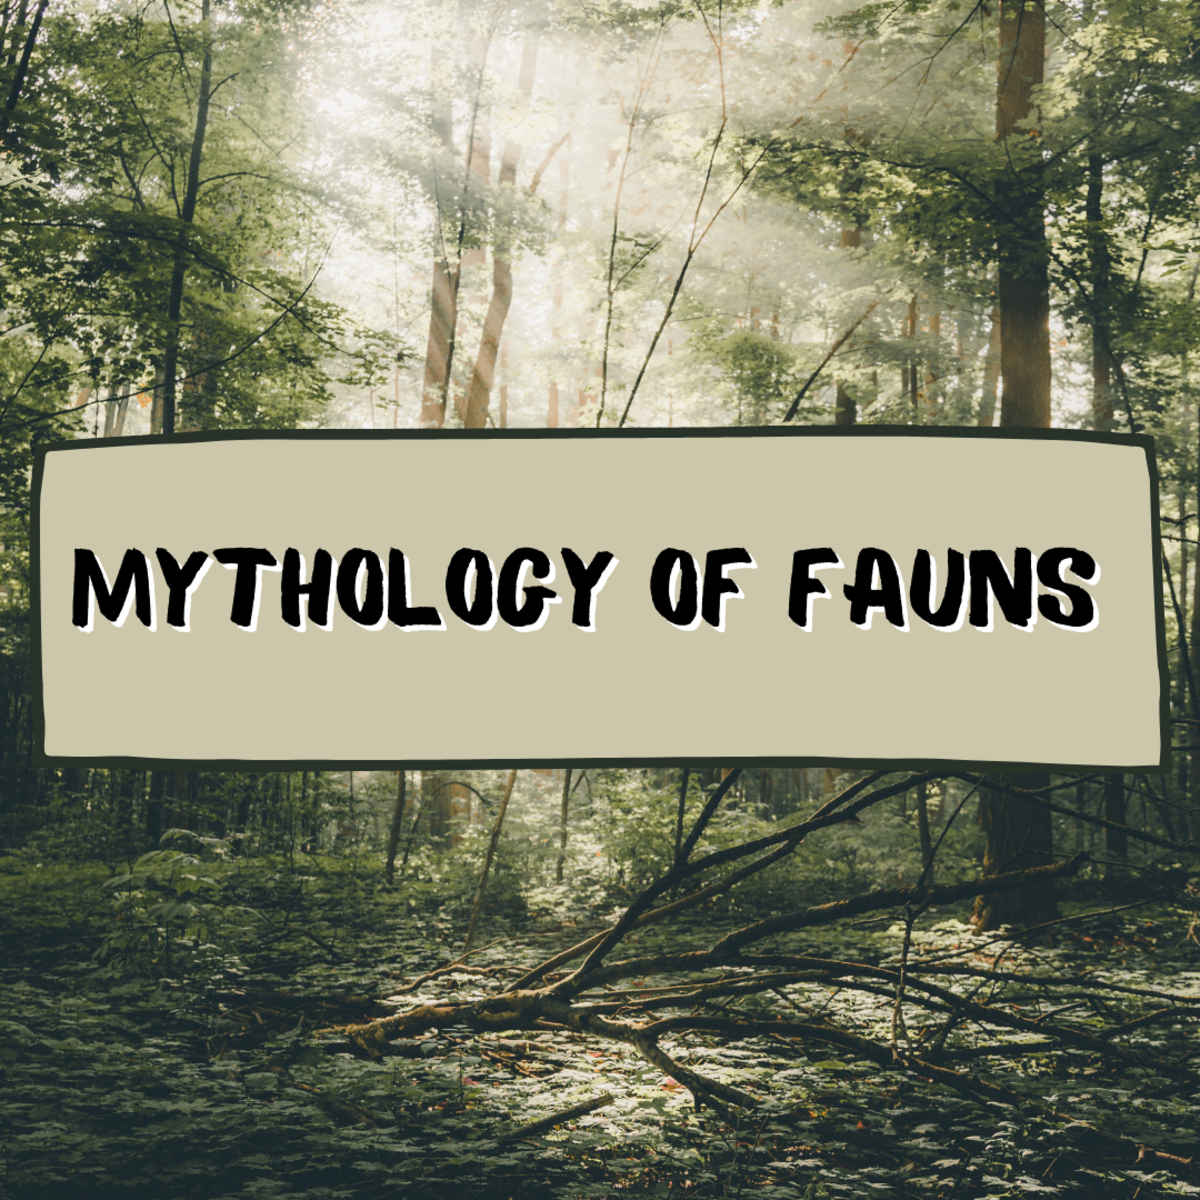 This article discusses the well-known faun from Roman (and later) Greek mythology. Fauns are more than C.S. Lewis's Mr. Tumnus – find out their fascinating history here.